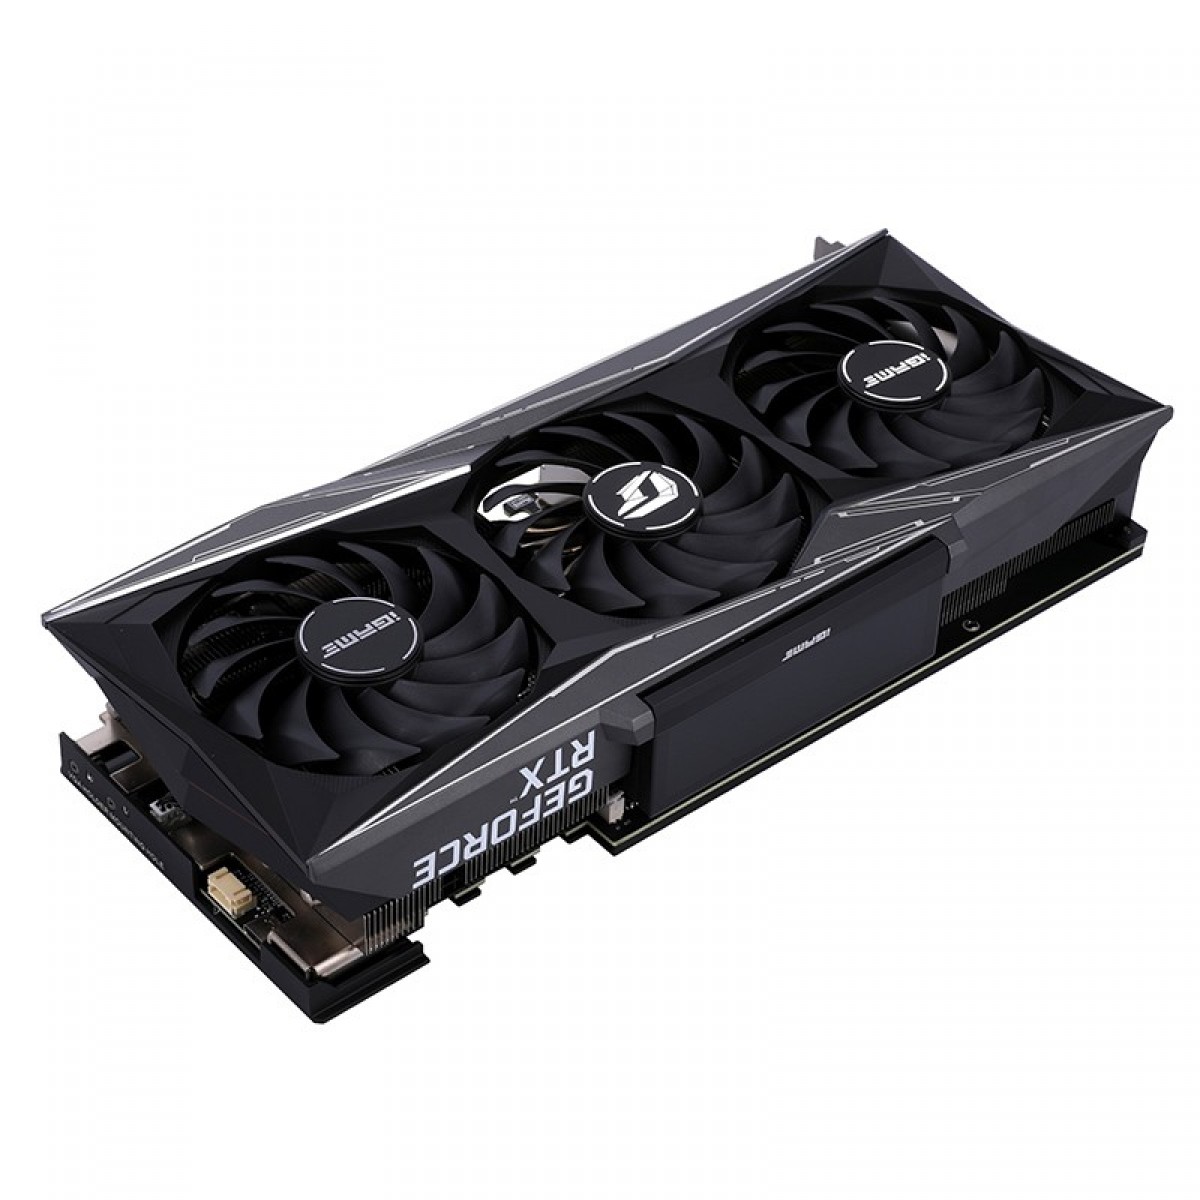 Placa de Vídeo Colorful NVIDIA GeForce iGame RTX 3080 Vulcan, OC, LHR, 12GB, DLSS, Ray Tracing